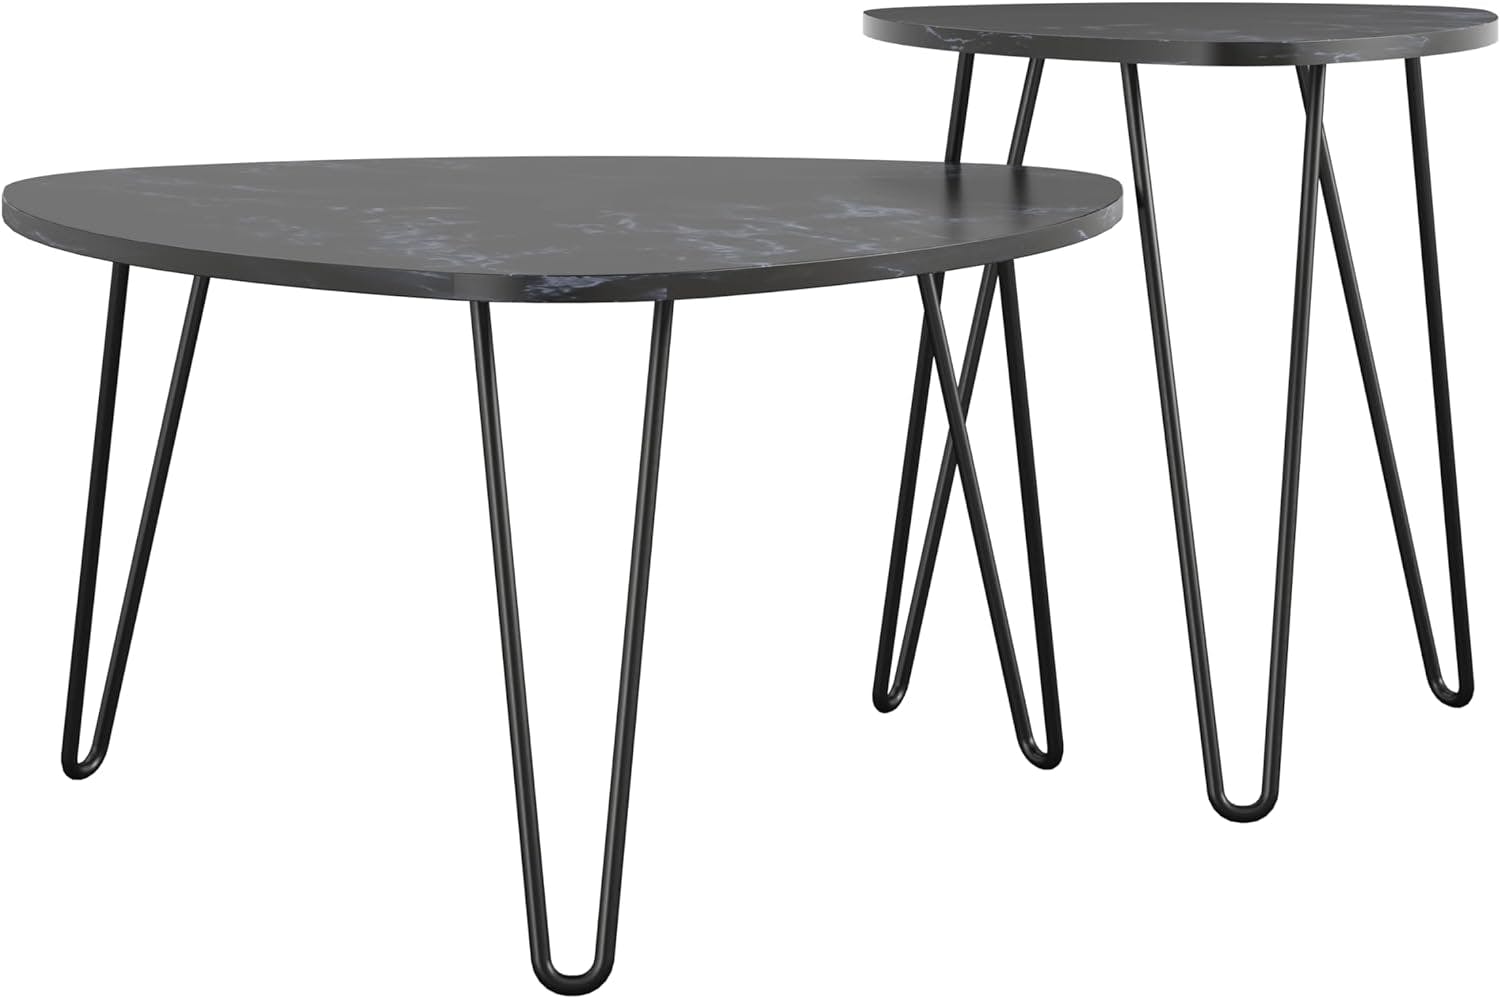 Retro Glam Black Faux Marble & Metal Hairpin Nesting Tables